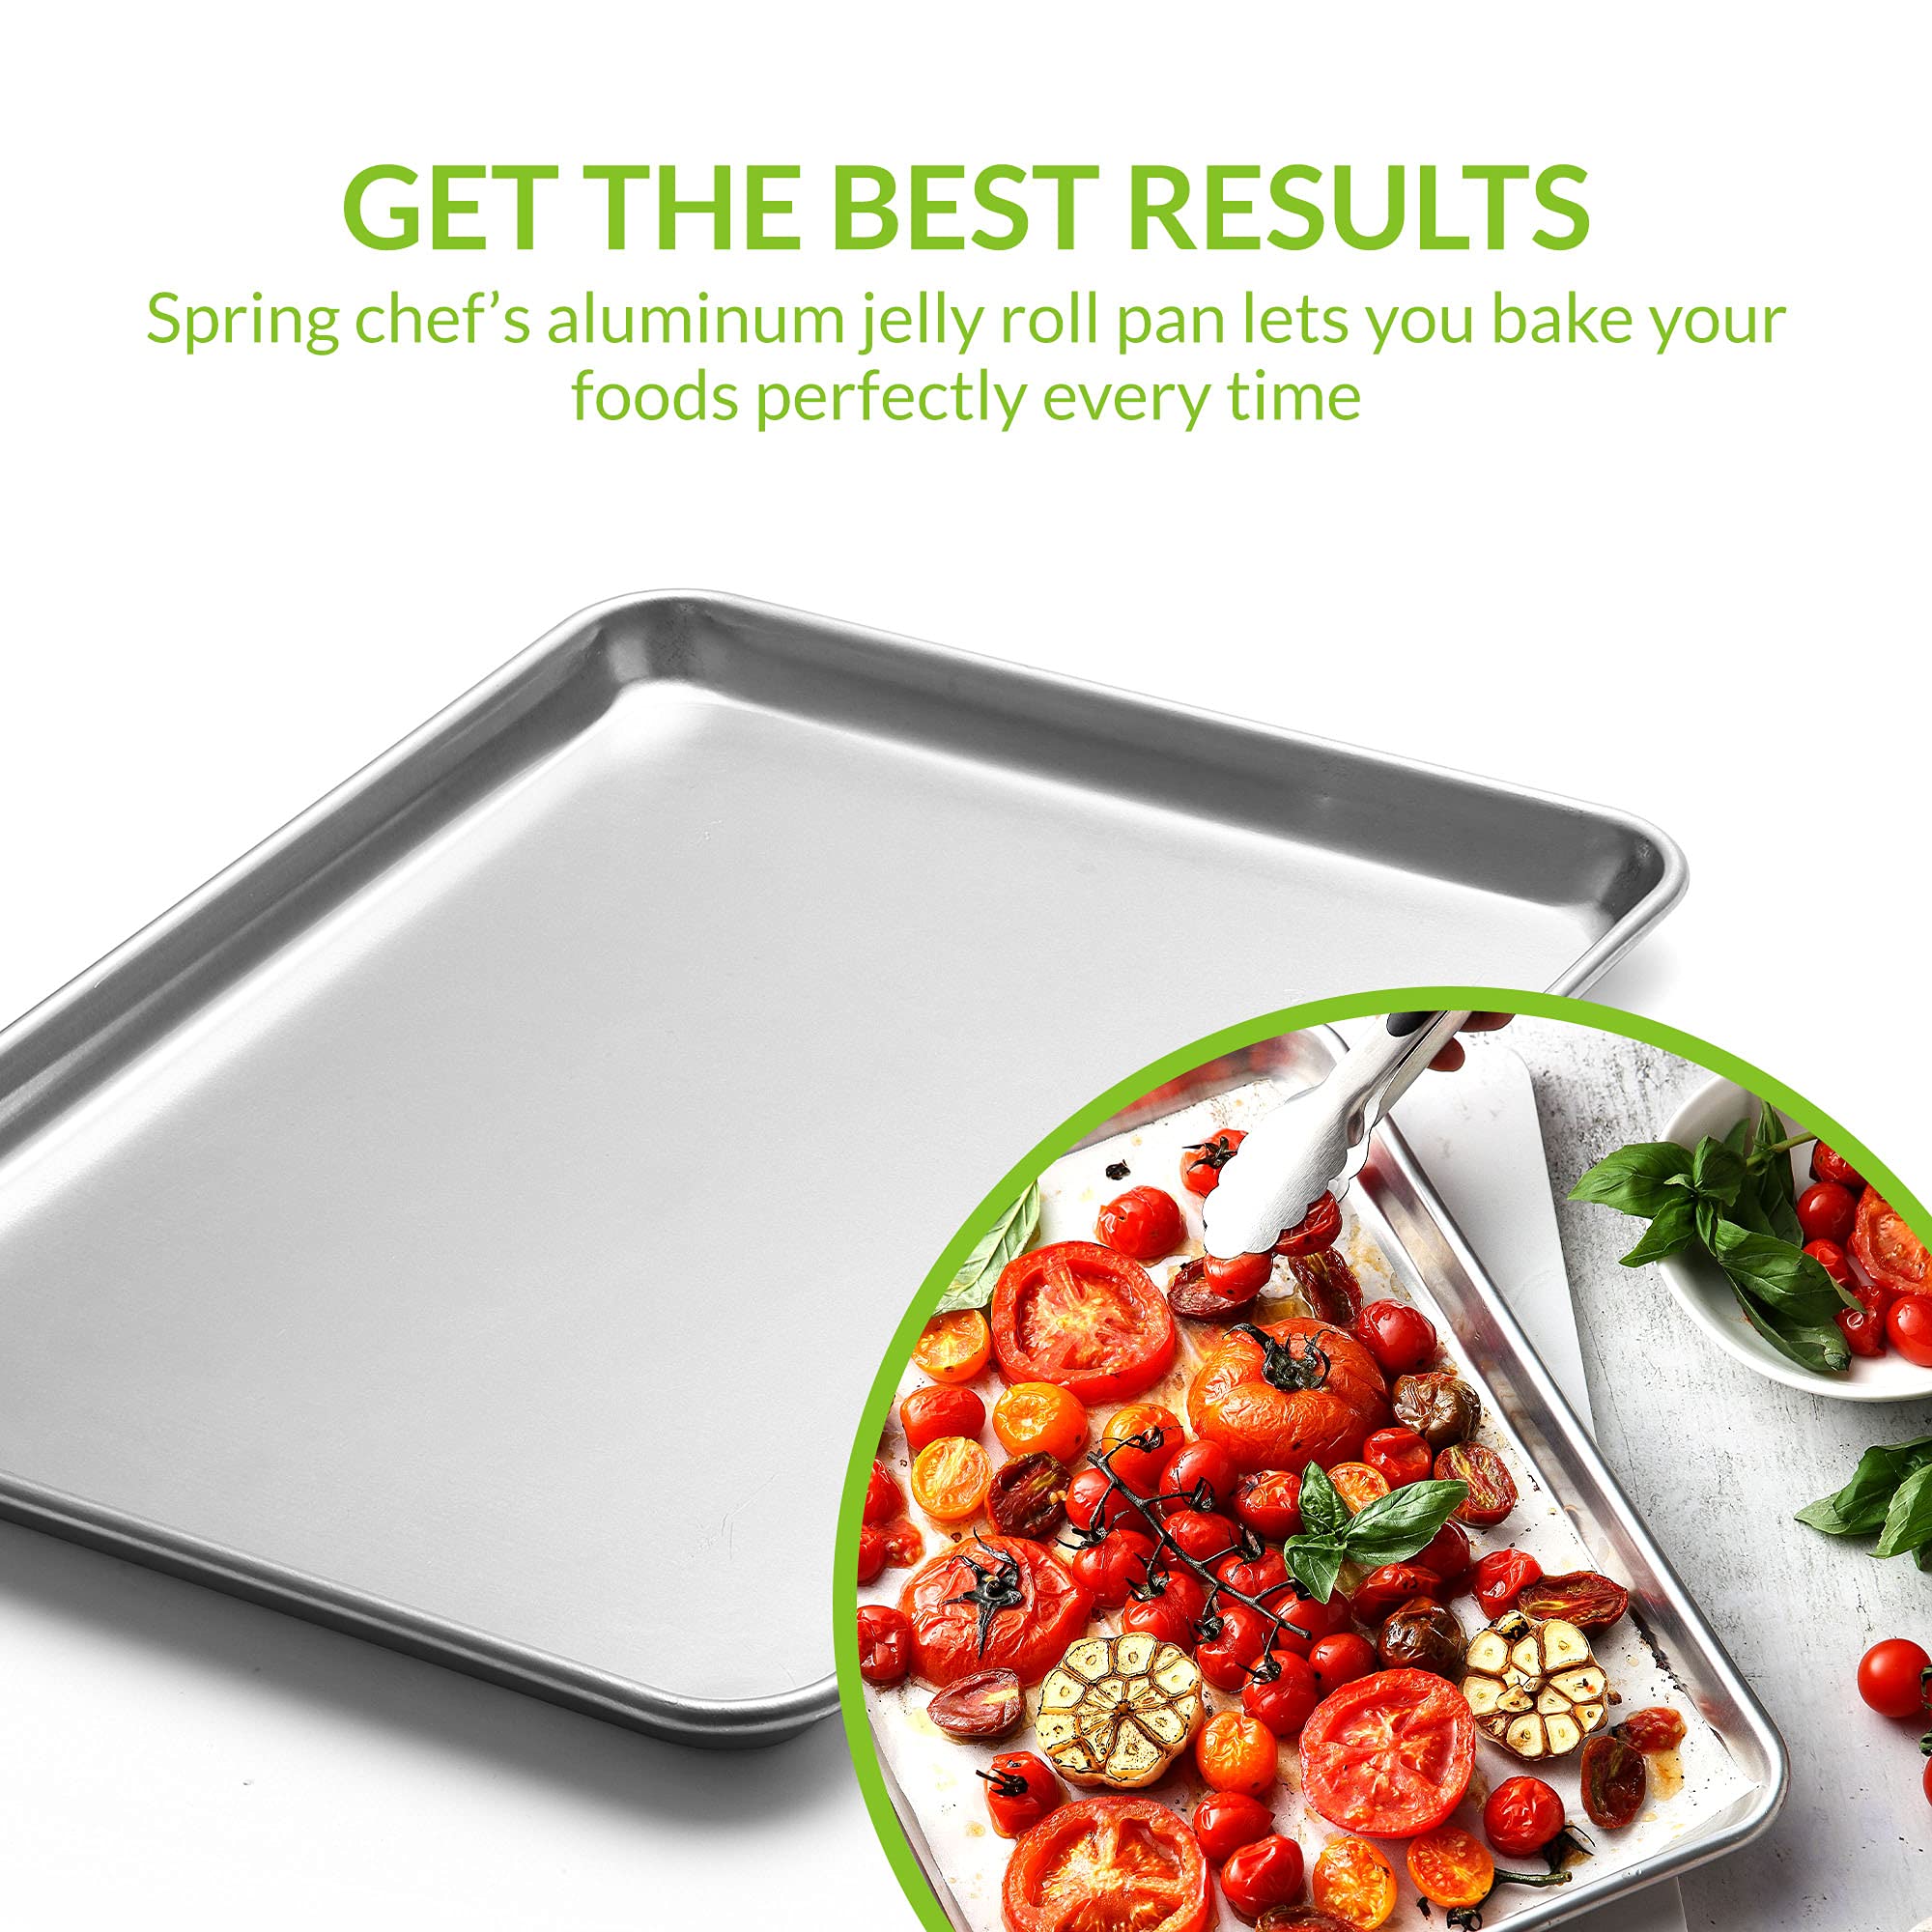 Spring Chef Jelly Roll Pan - 11.2 x 15.7-inch Durable Aluminum Baking Pan - Non-Rust Baking Tray for Cookies, Meat, Vegetables, Pastries - Distributes Heat Evenly - Easy To Clean Cookie Sheet Pan